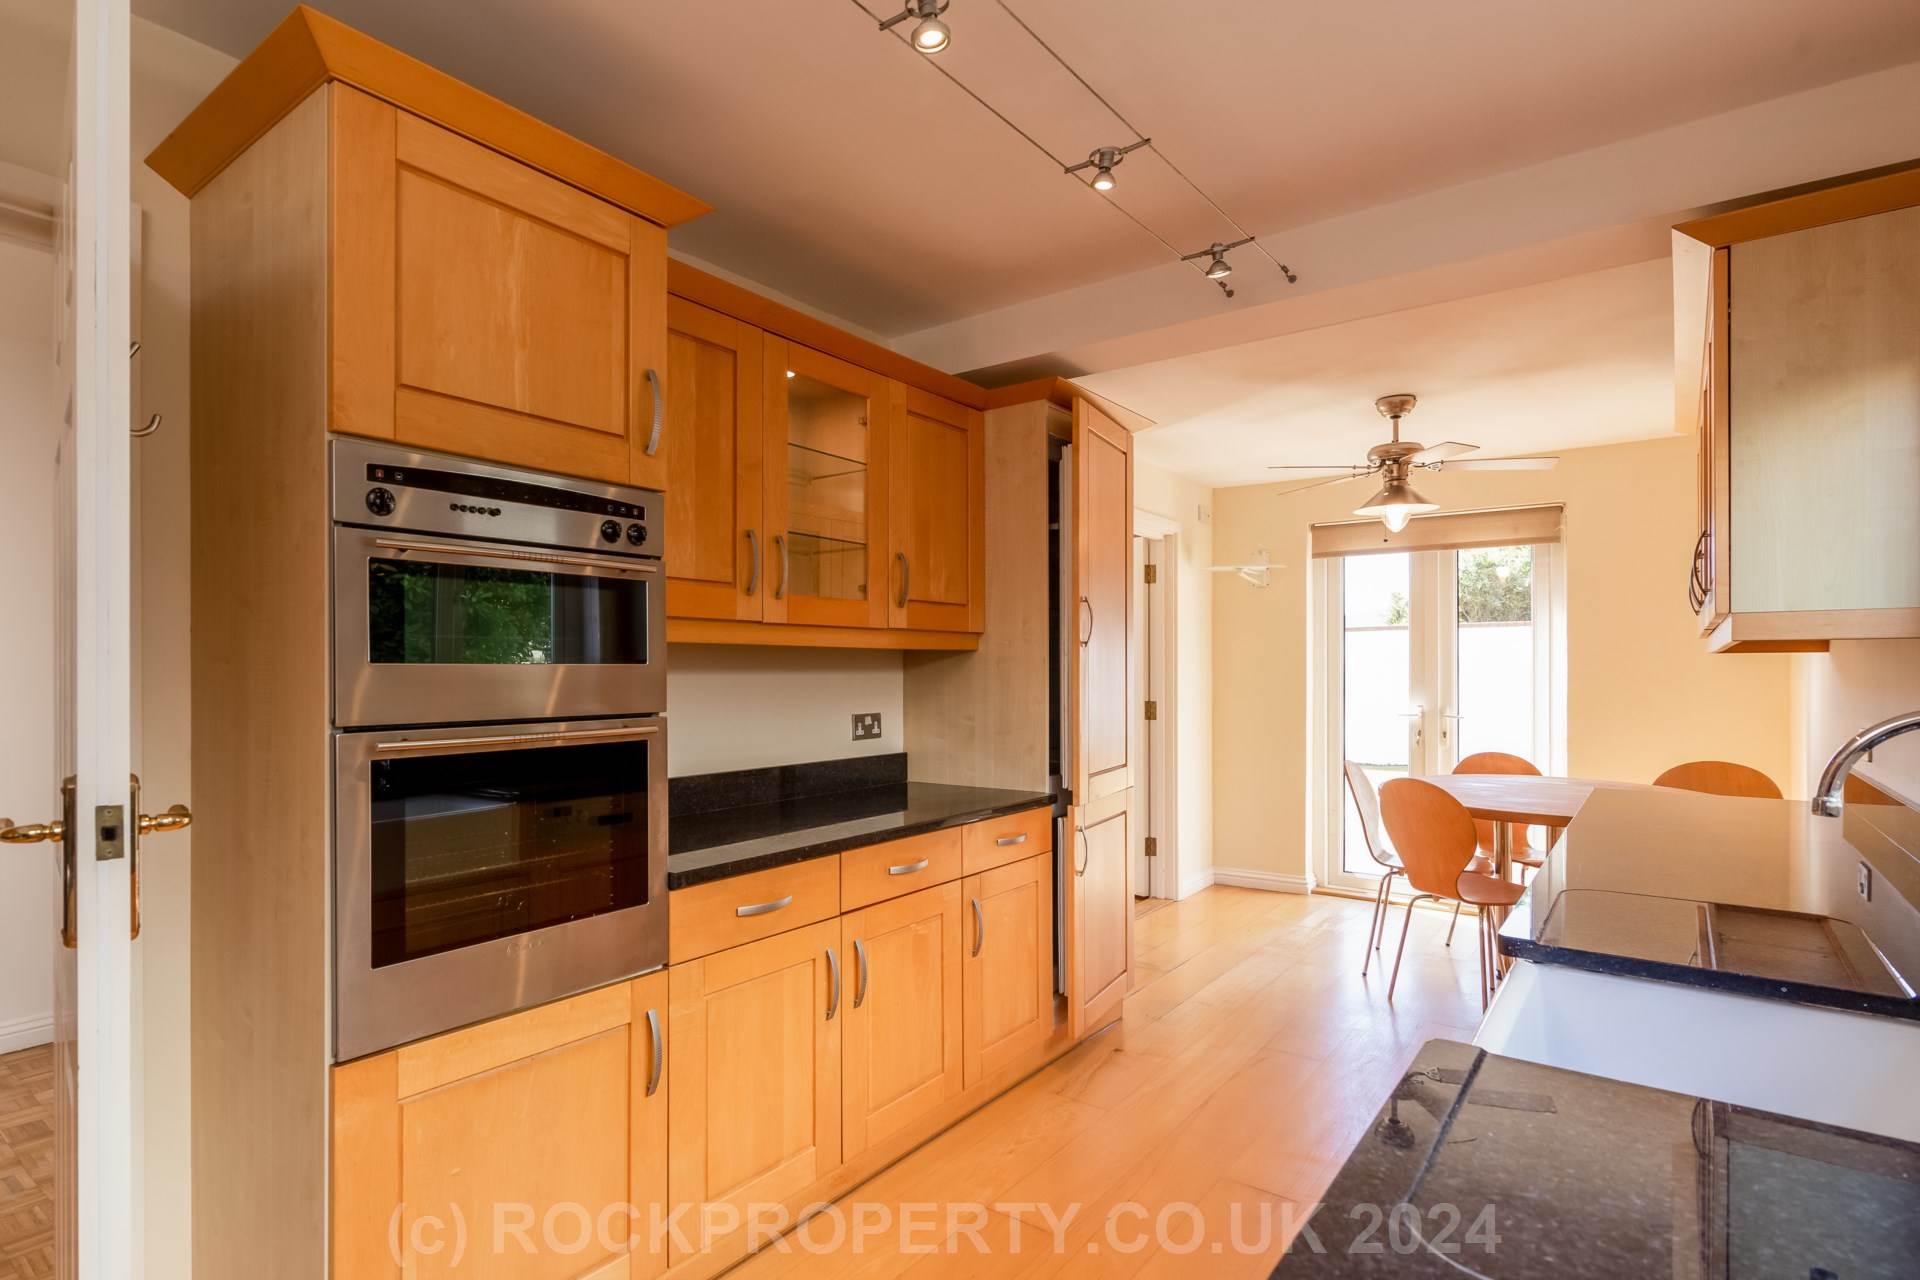 SUBSTANTIAL 3/4 BED FAMILY HOUSE, Outskirts of St Helier, Image 8